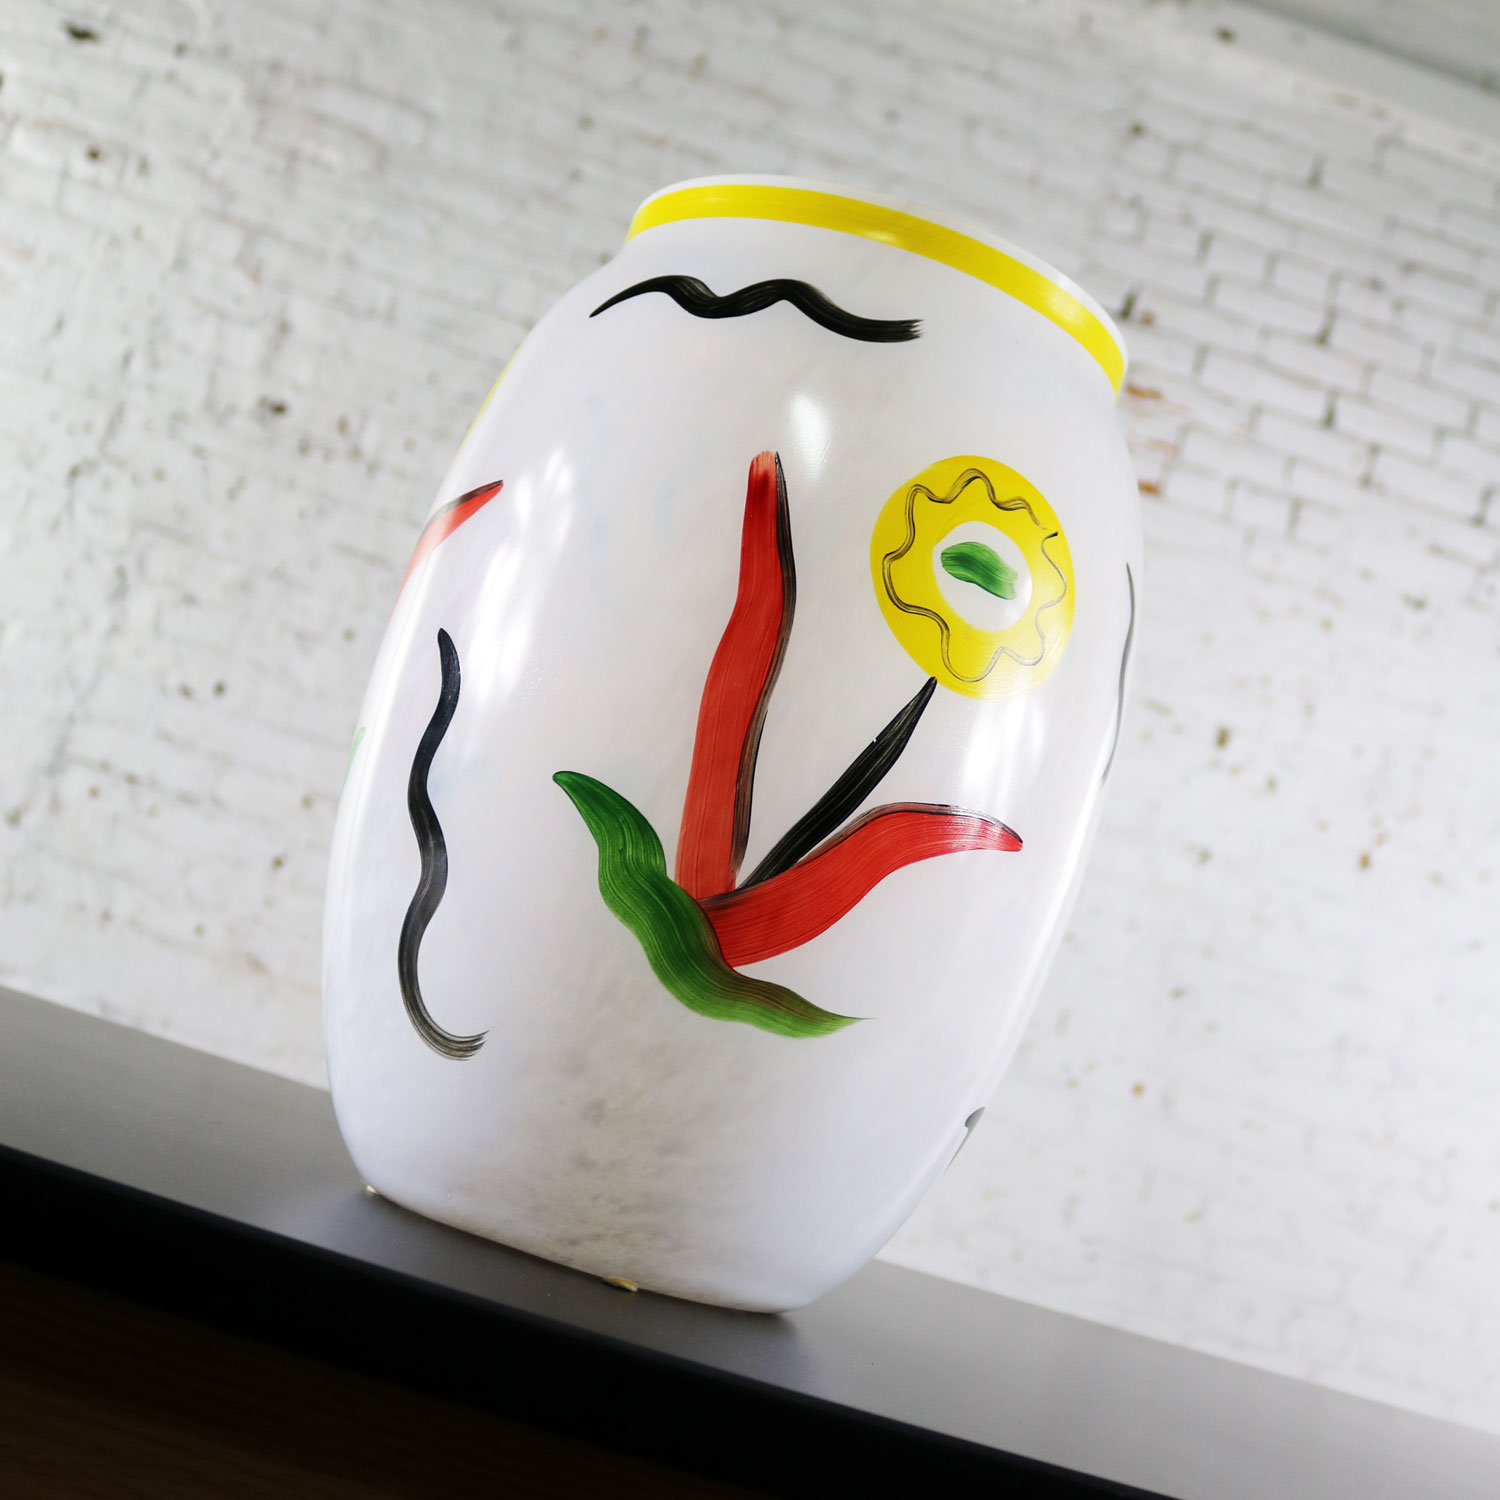 Large Hand Painted Kosta Boda Atelier Vase by Ulrica Hydman-Vallien Limited Edition